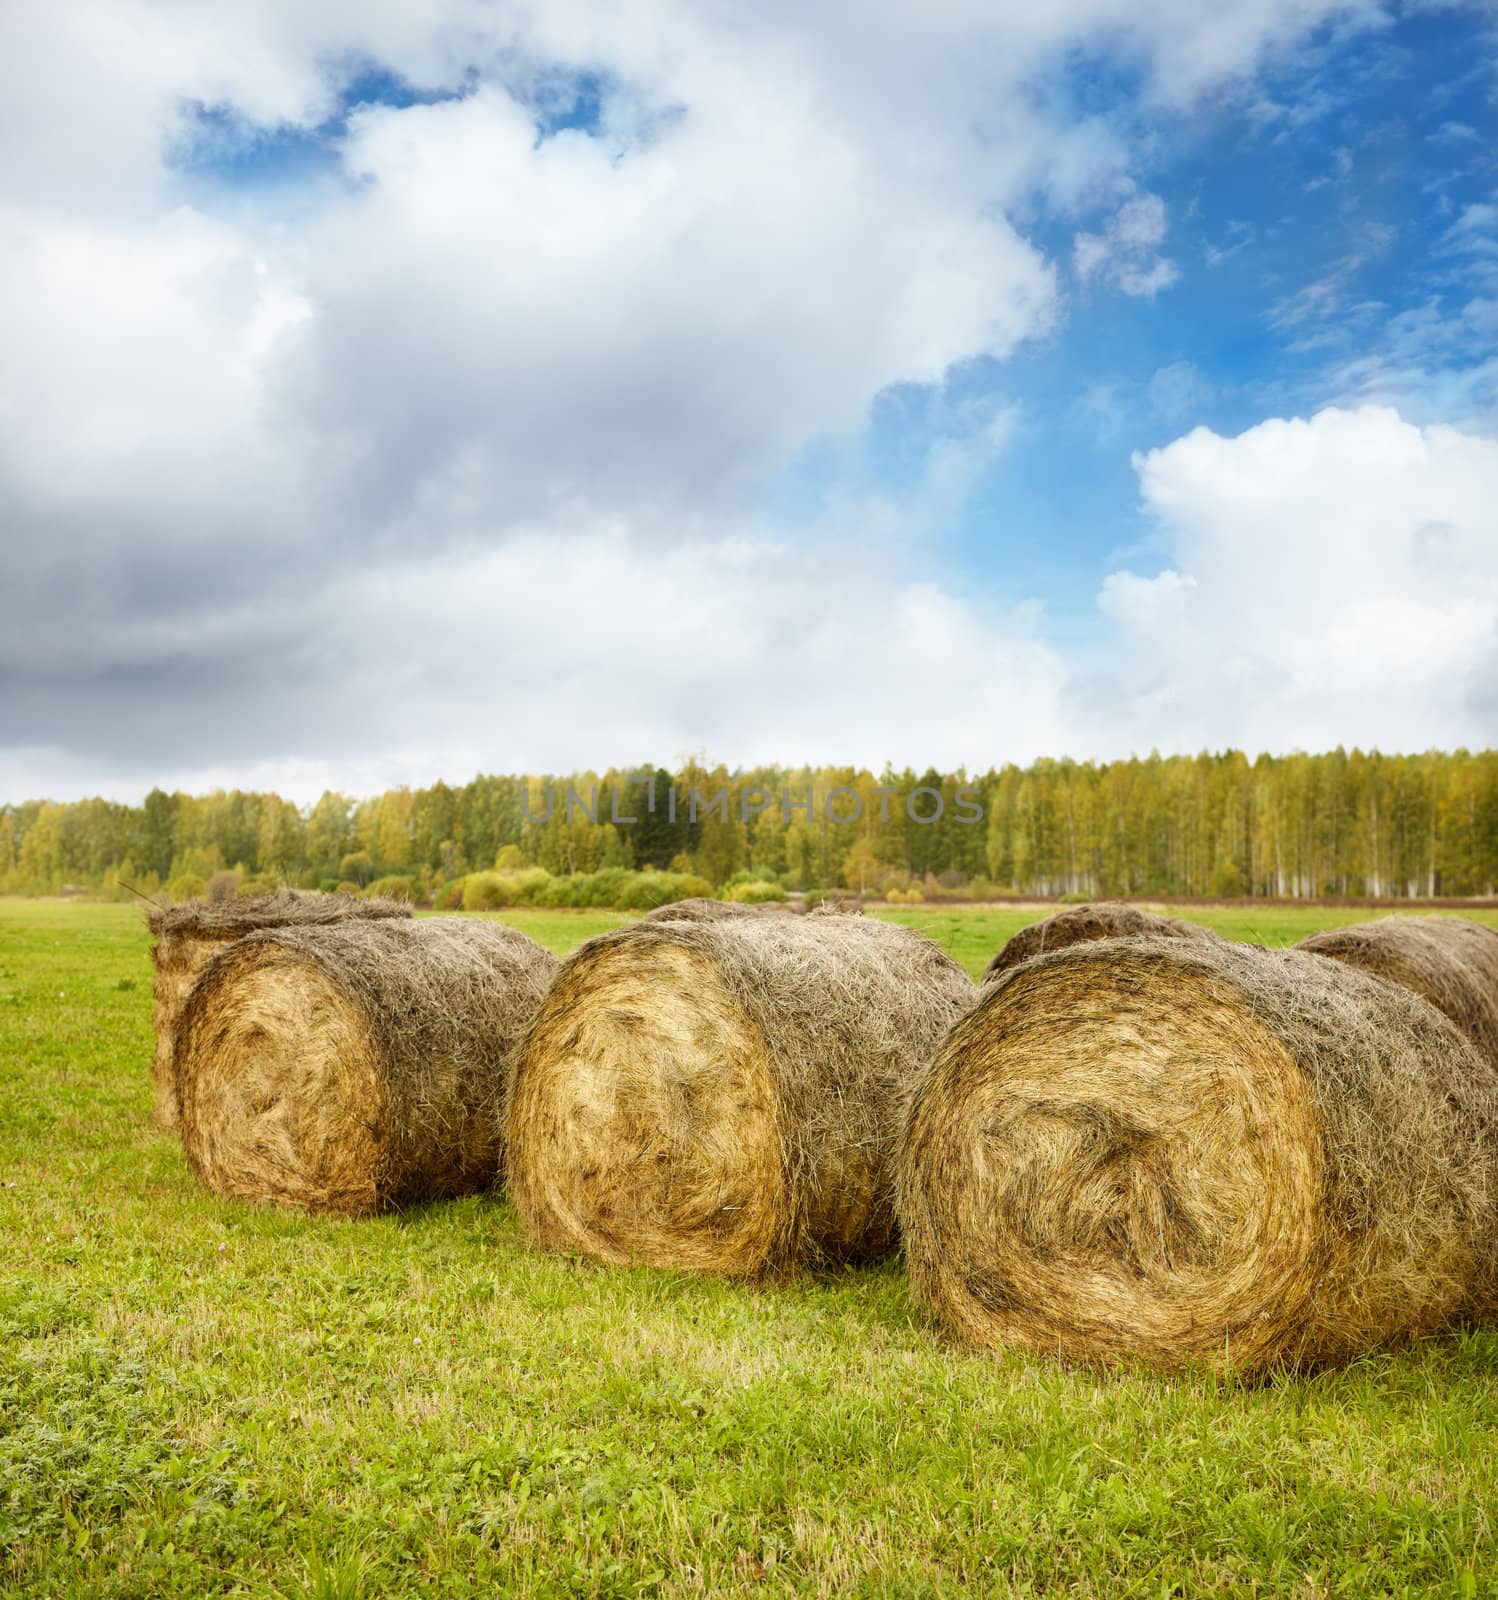 Bales of Hay after harvest, selective focus on nearest